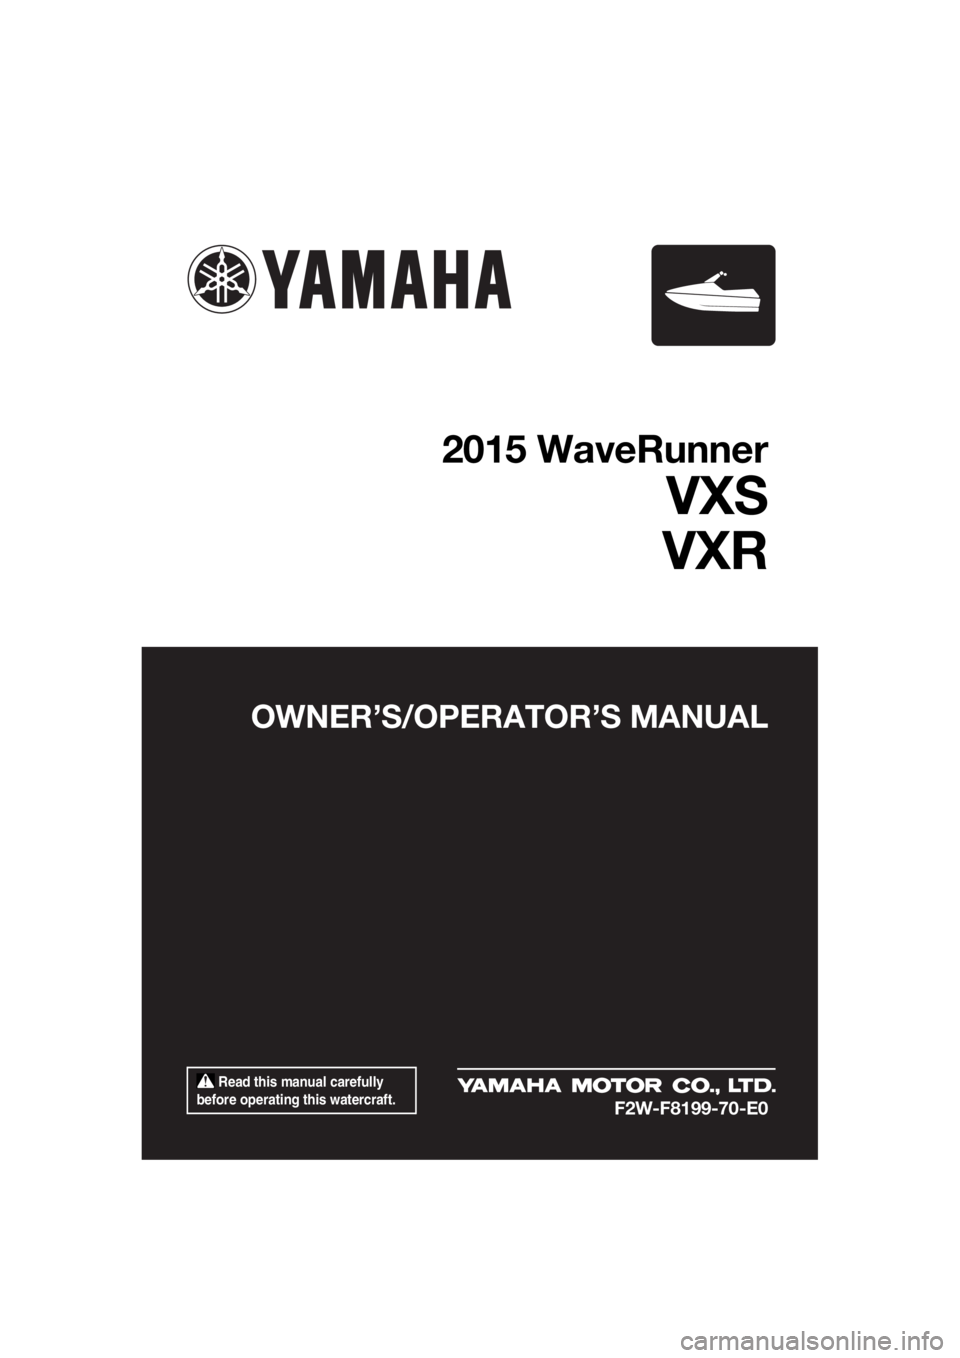 YAMAHA VXR 2015  Owners Manual  Read this manual carefully 
before operating this watercraft.
OWNER’S/OPERATOR’S MANUAL
2015 WaveRunner
VXS
VXR
F2W-F8199-70-E0
UF2W70E0.book  Page 1  Tuesday, December 8, 2015  9:03 AM 